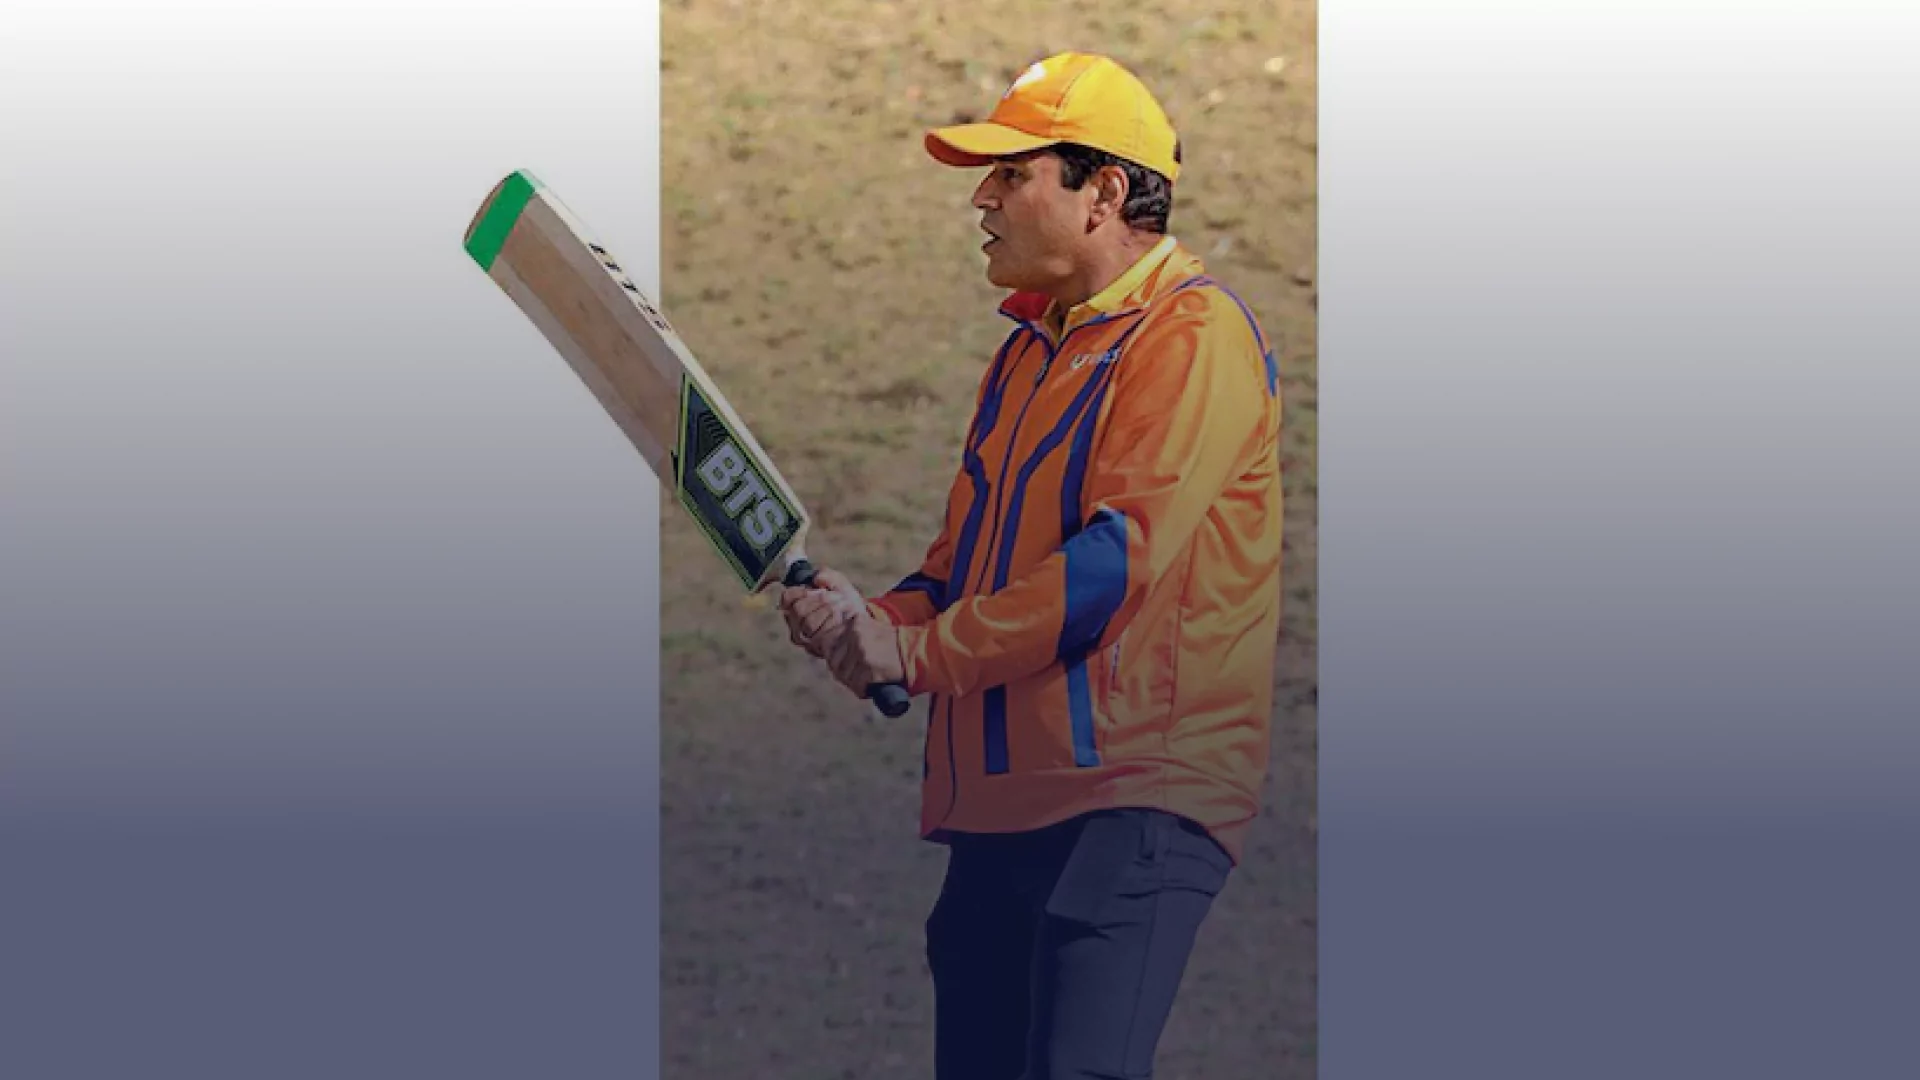 How Global University Systems APAC CEO Sharad Mehra Used Cricket For Team Building